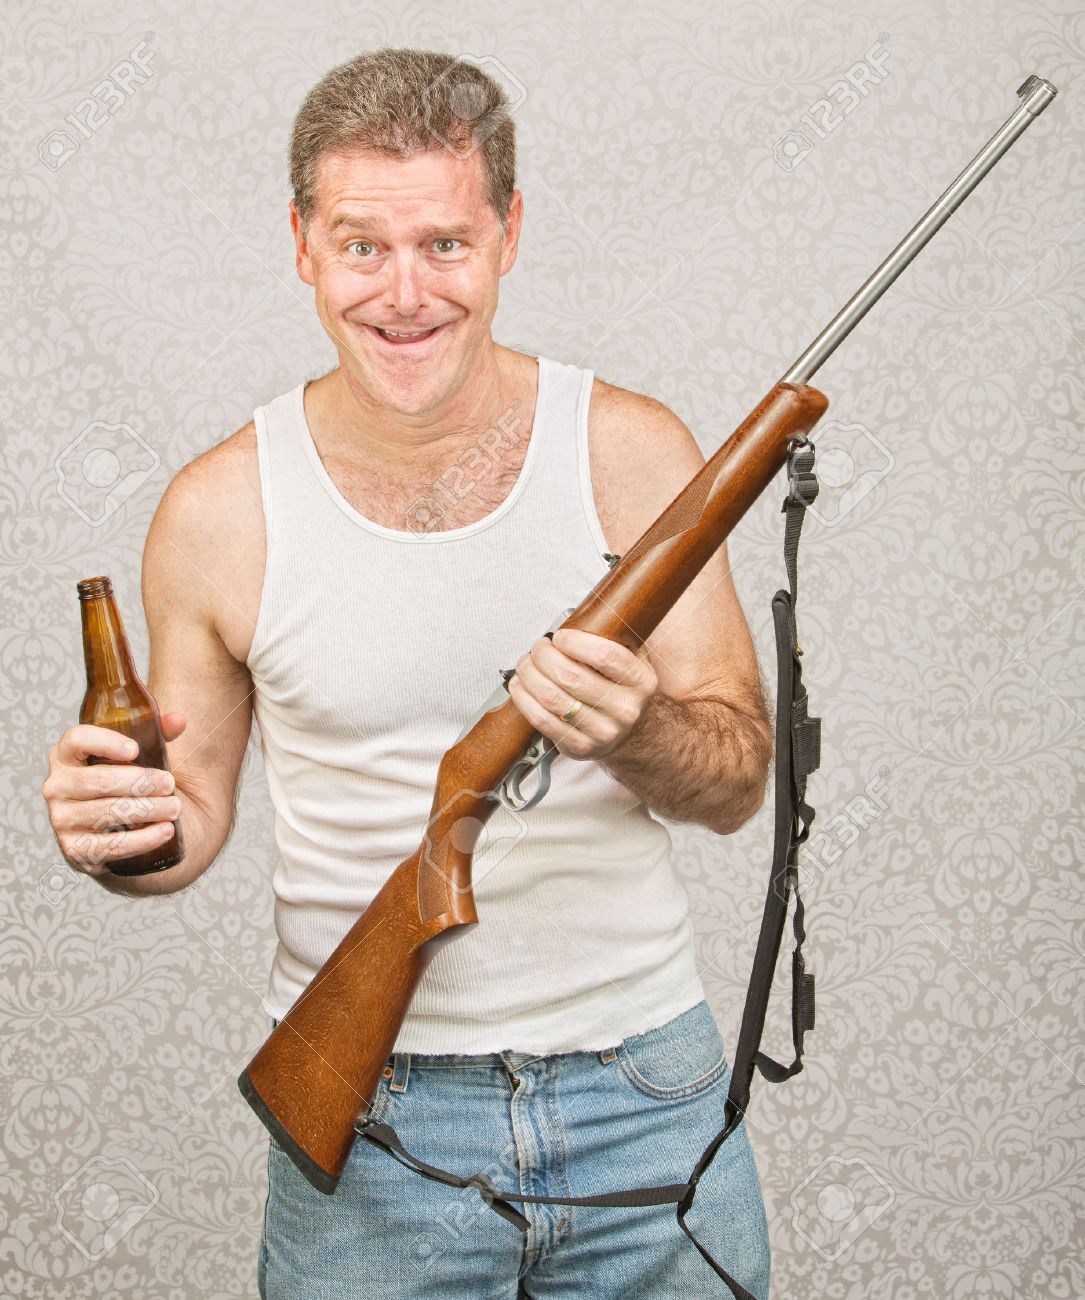 23050420-Single-male-hillbilly-holding-beer-and-rifle-Stock-Photo-redneck.jpg